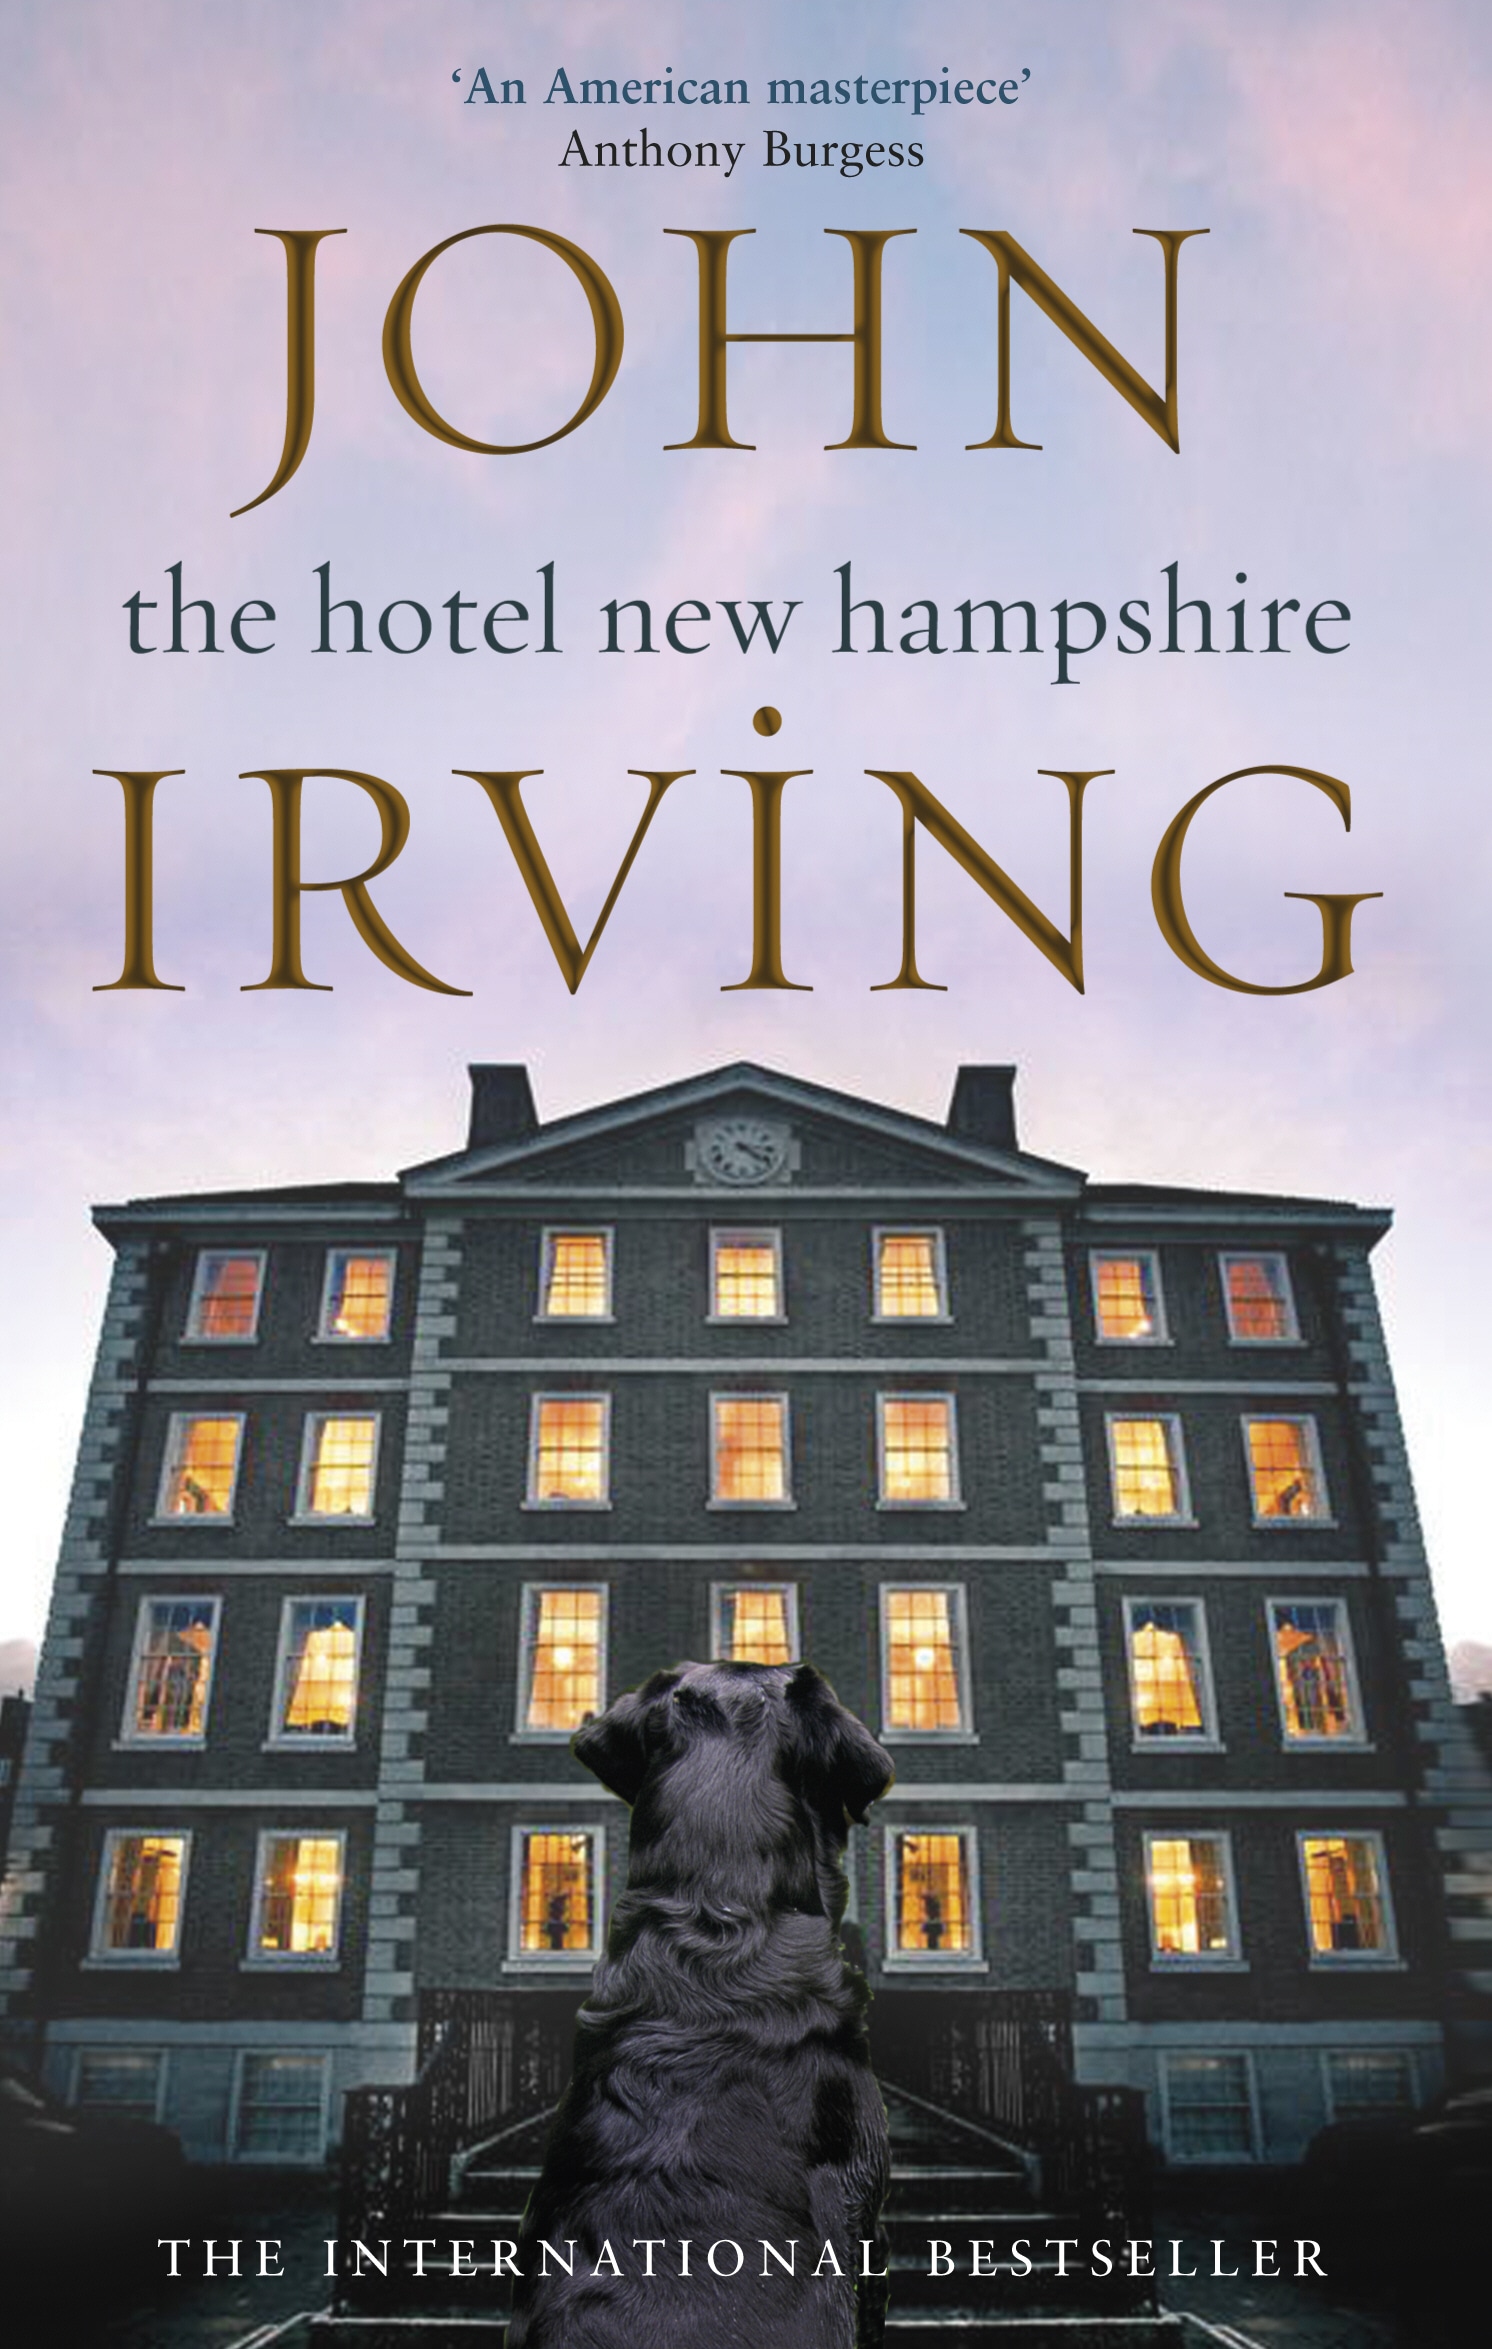 Book “The Hotel New Hampshire” by John Irving — October 22, 1982